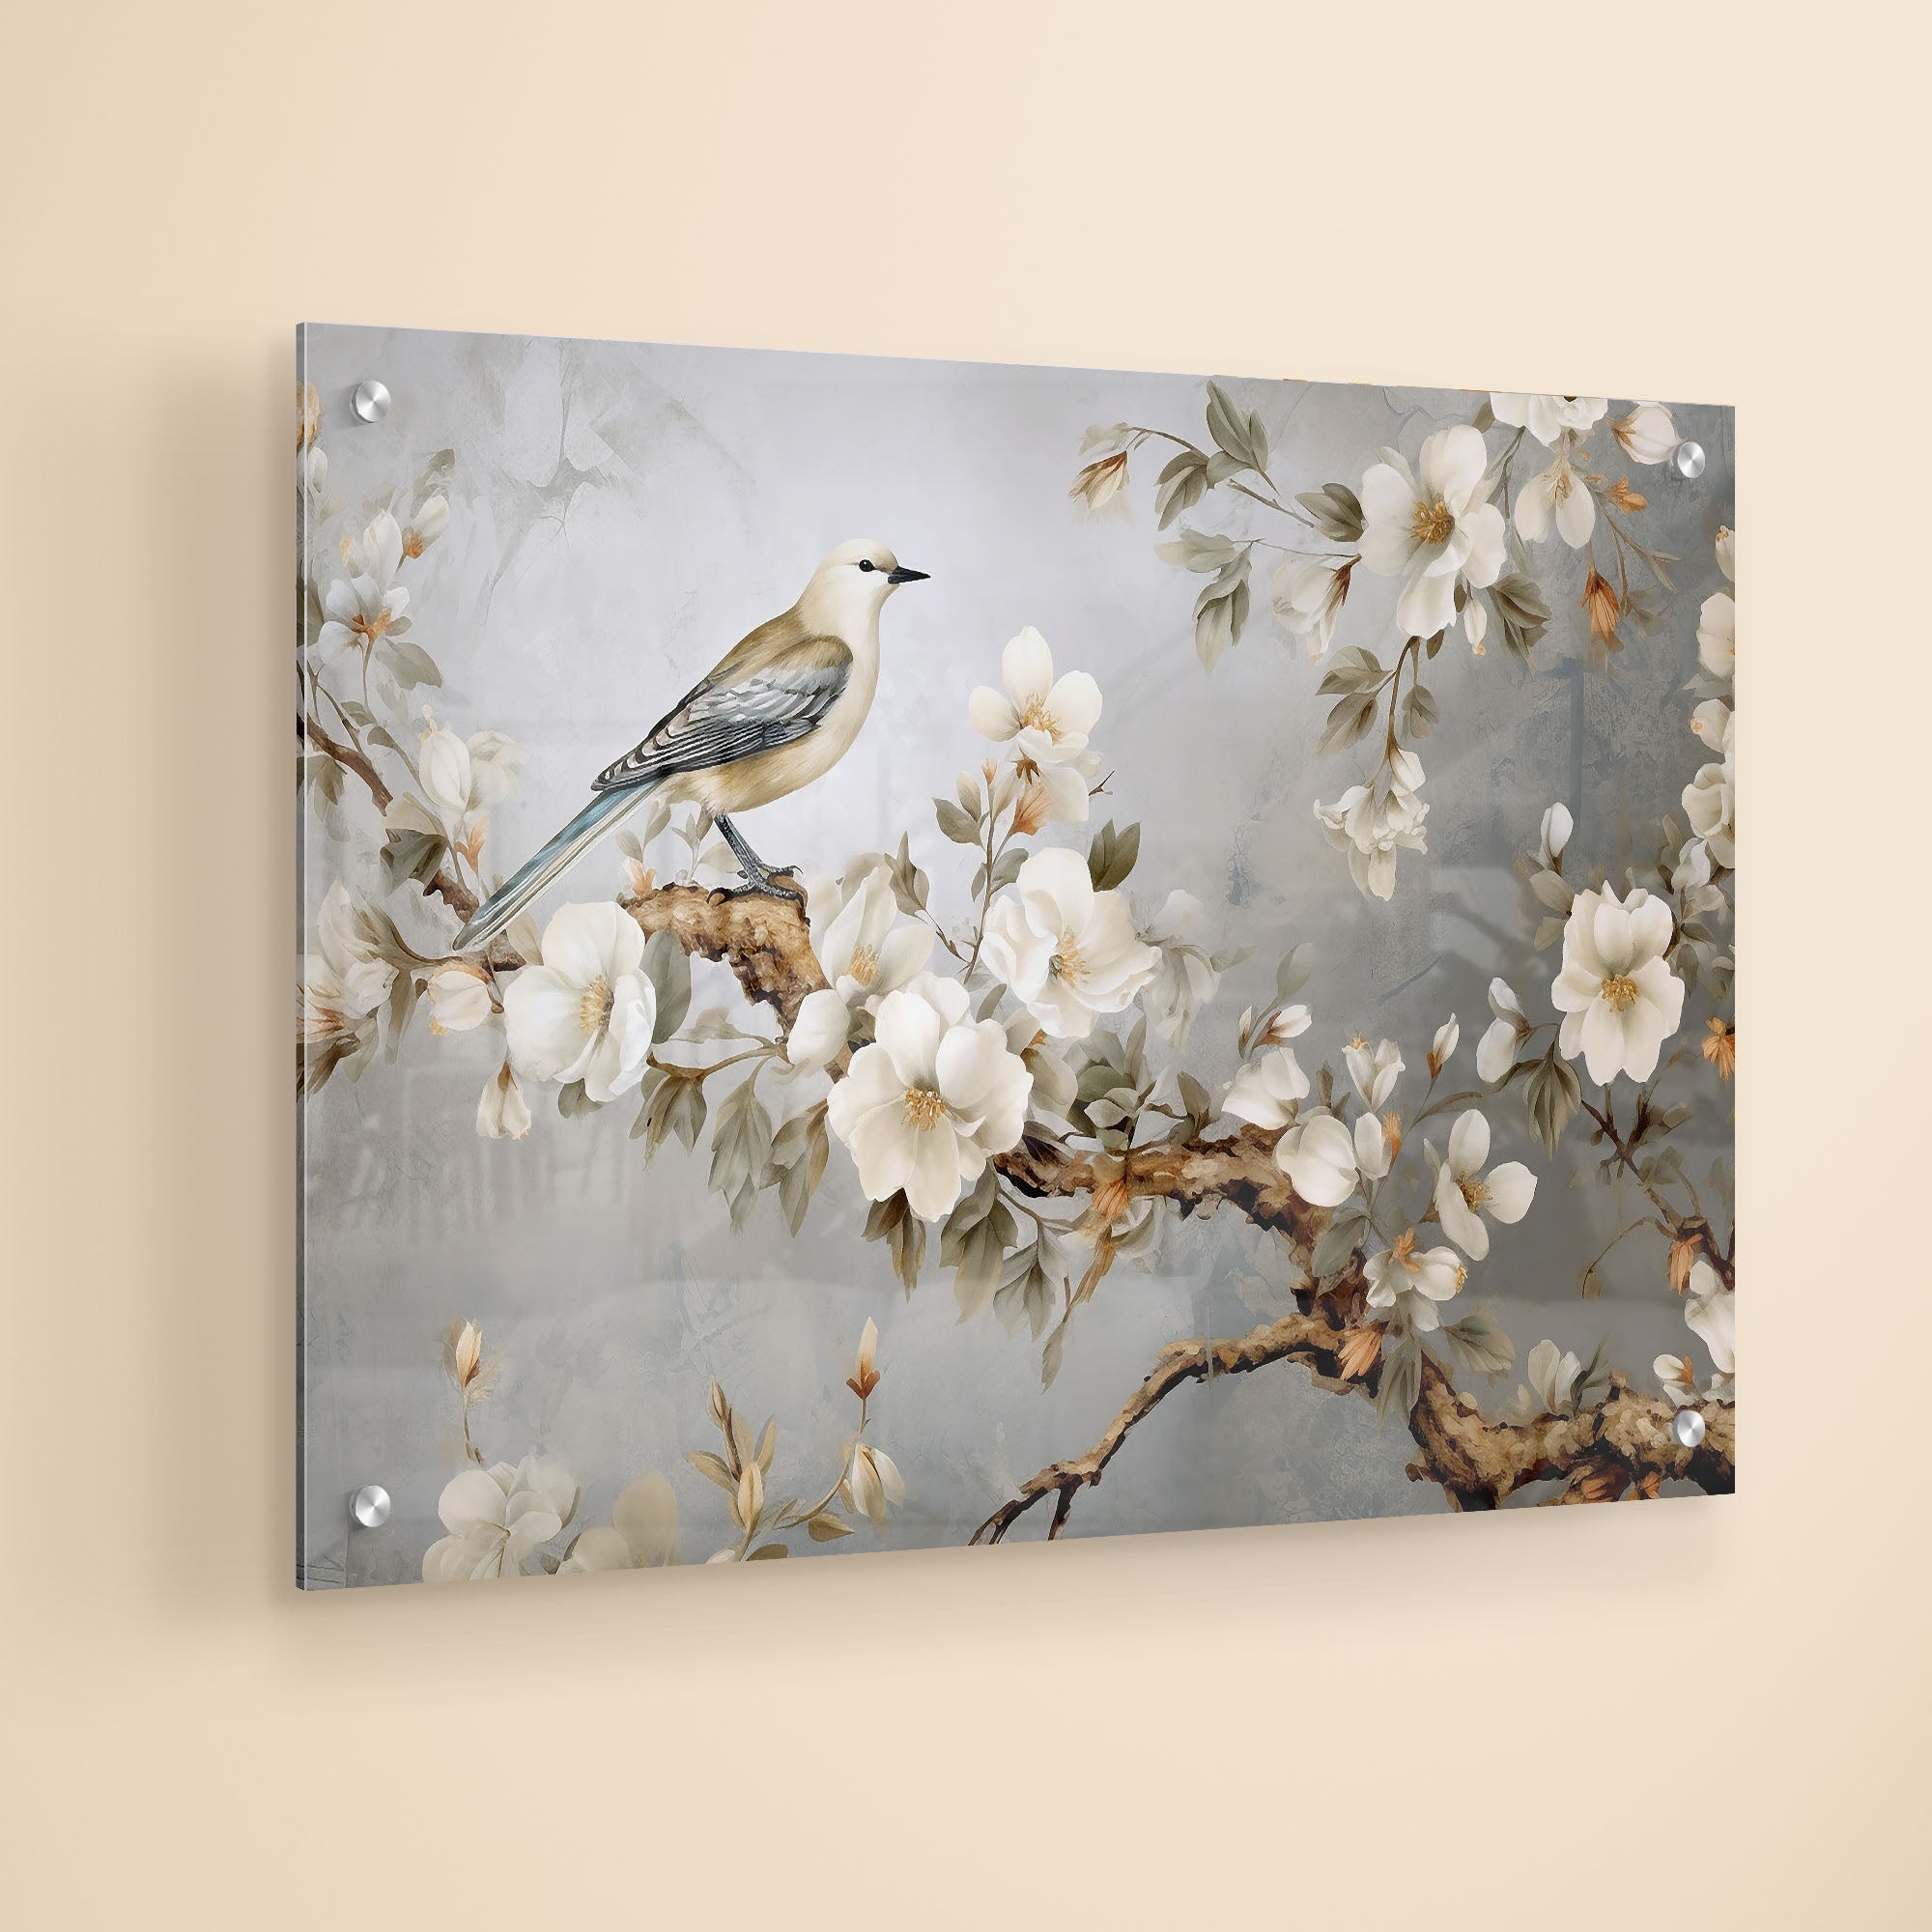 Abstract Birds and Flower Tree Acrylic Wall Painting